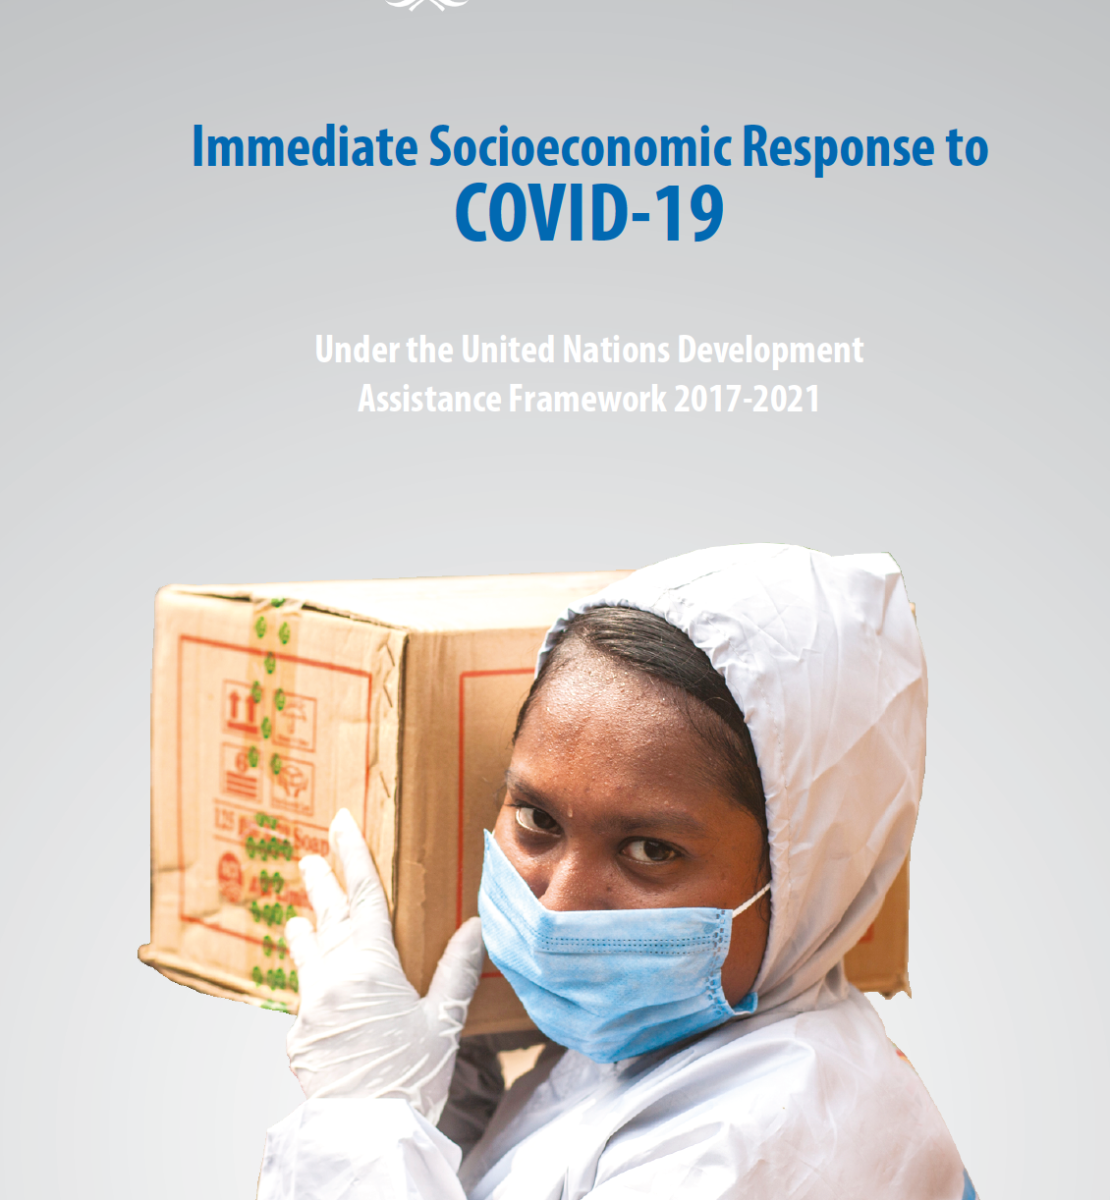 Cover shows the title "Immediate Socioeconomic Response to COVID-19 over a image of a woman with a blue mask carrying a box.